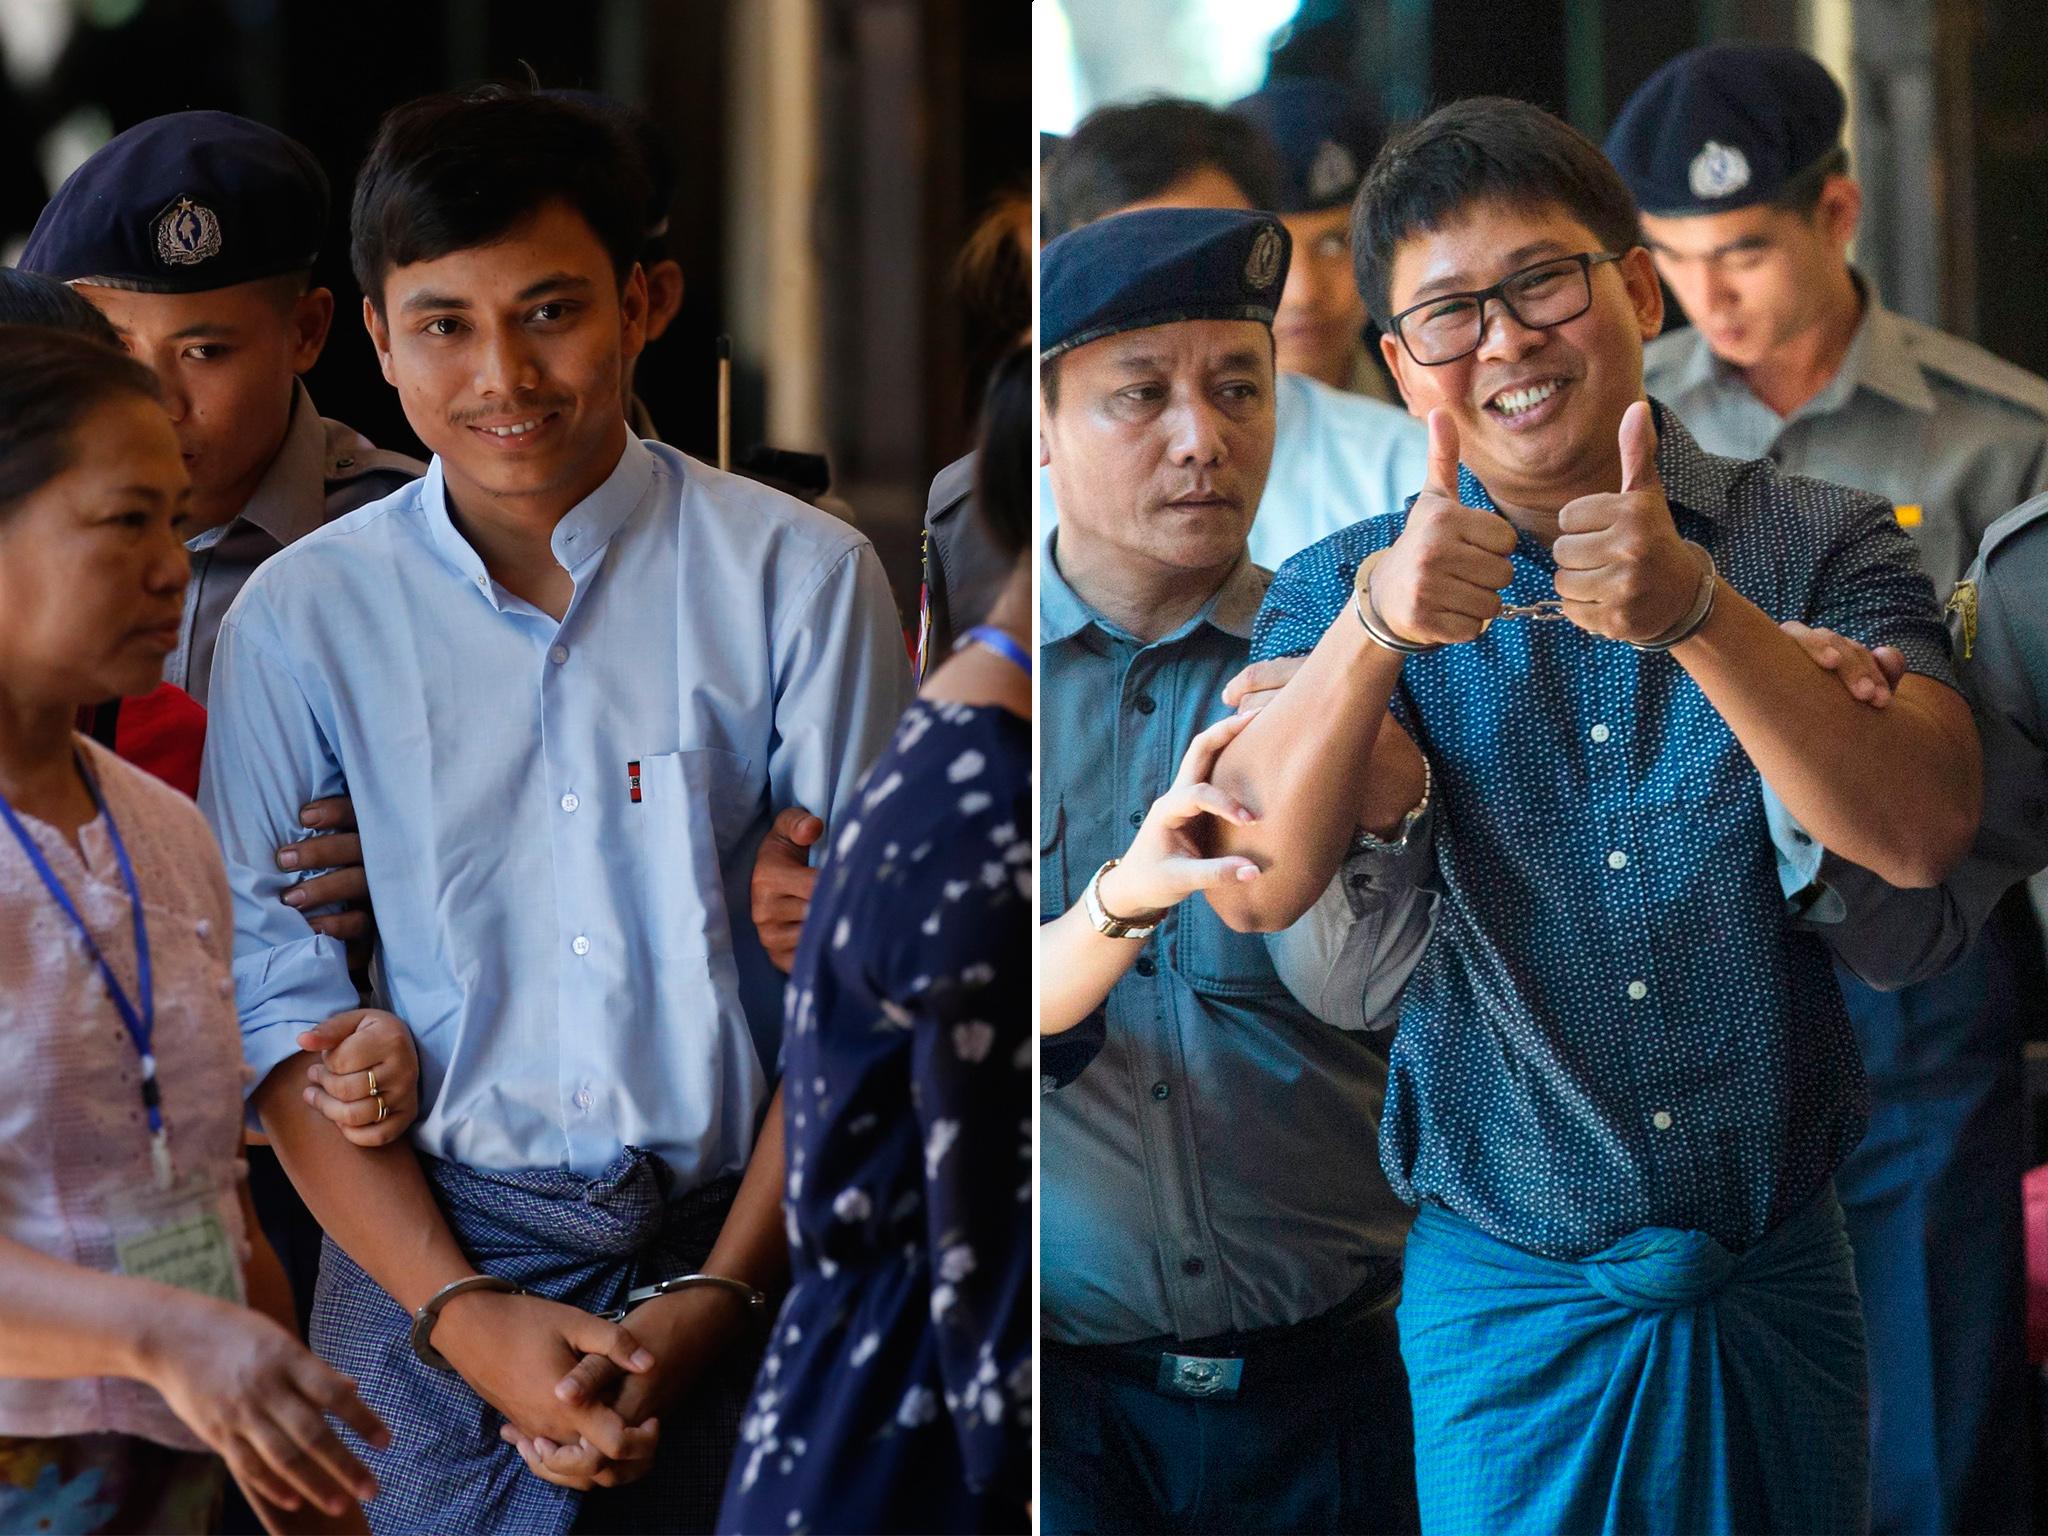 Kyaw Soe Oo (left) and Wa Lone will be charged under the colonial-era Official Secrets Act, which carries a maximum penalty of 14 years in prison